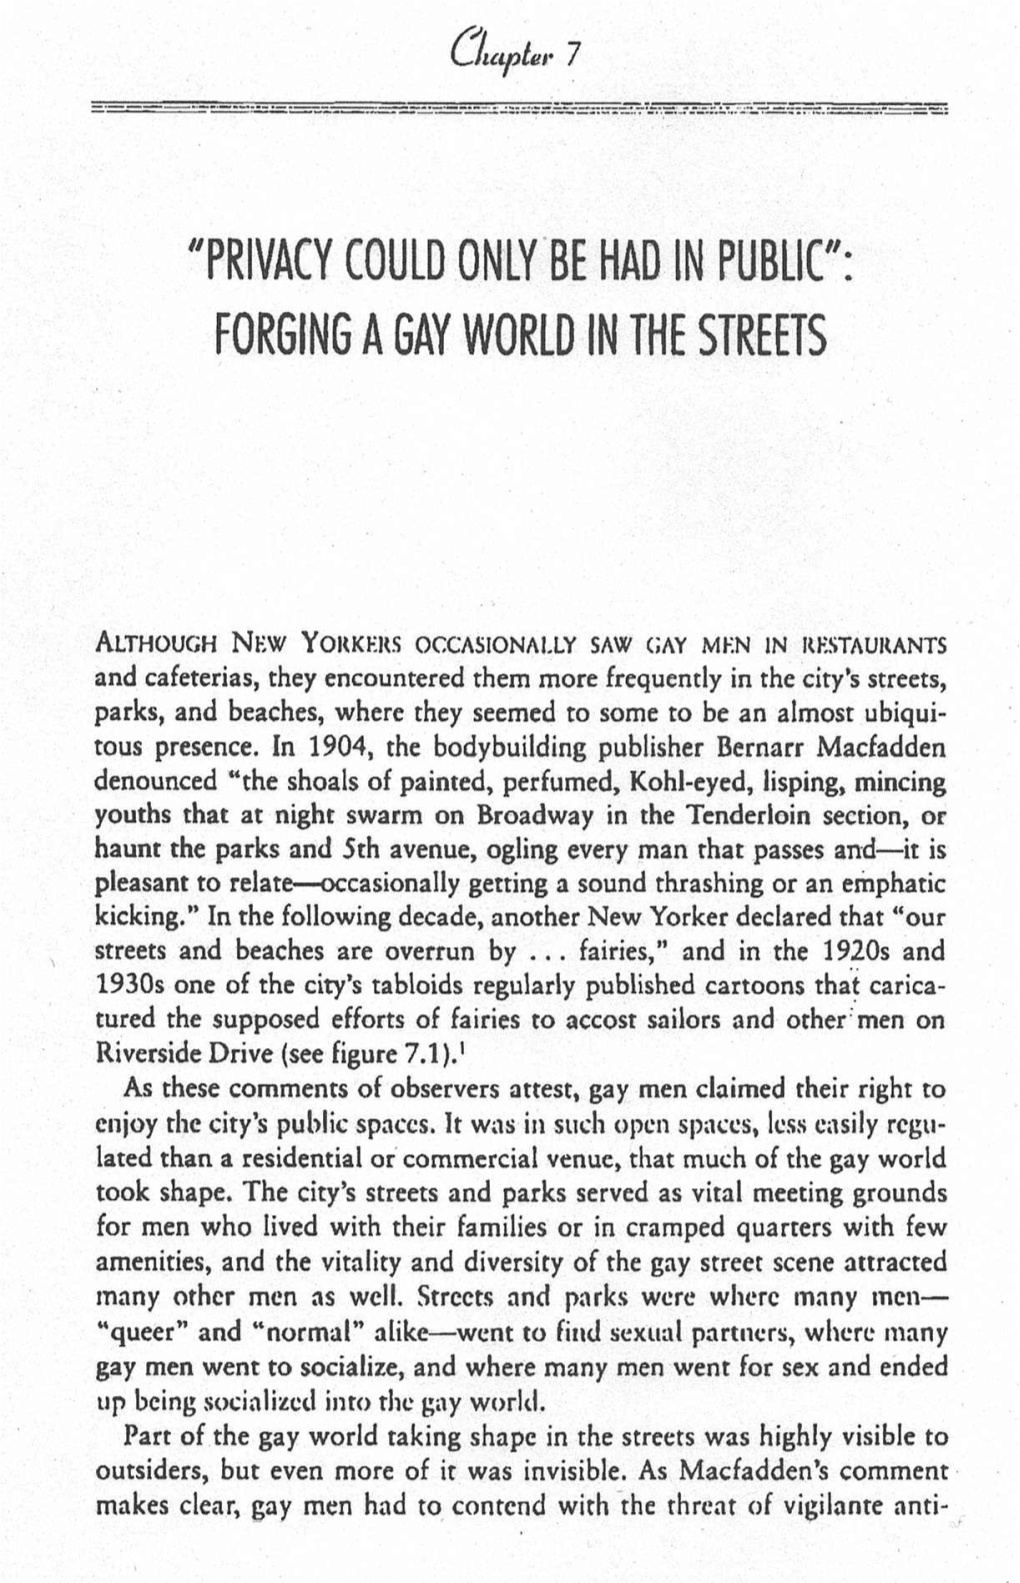 "PRIVACY COULD Ontyobe HAD in PUBLIC": FORGING a GAY WORLD in the STREETS